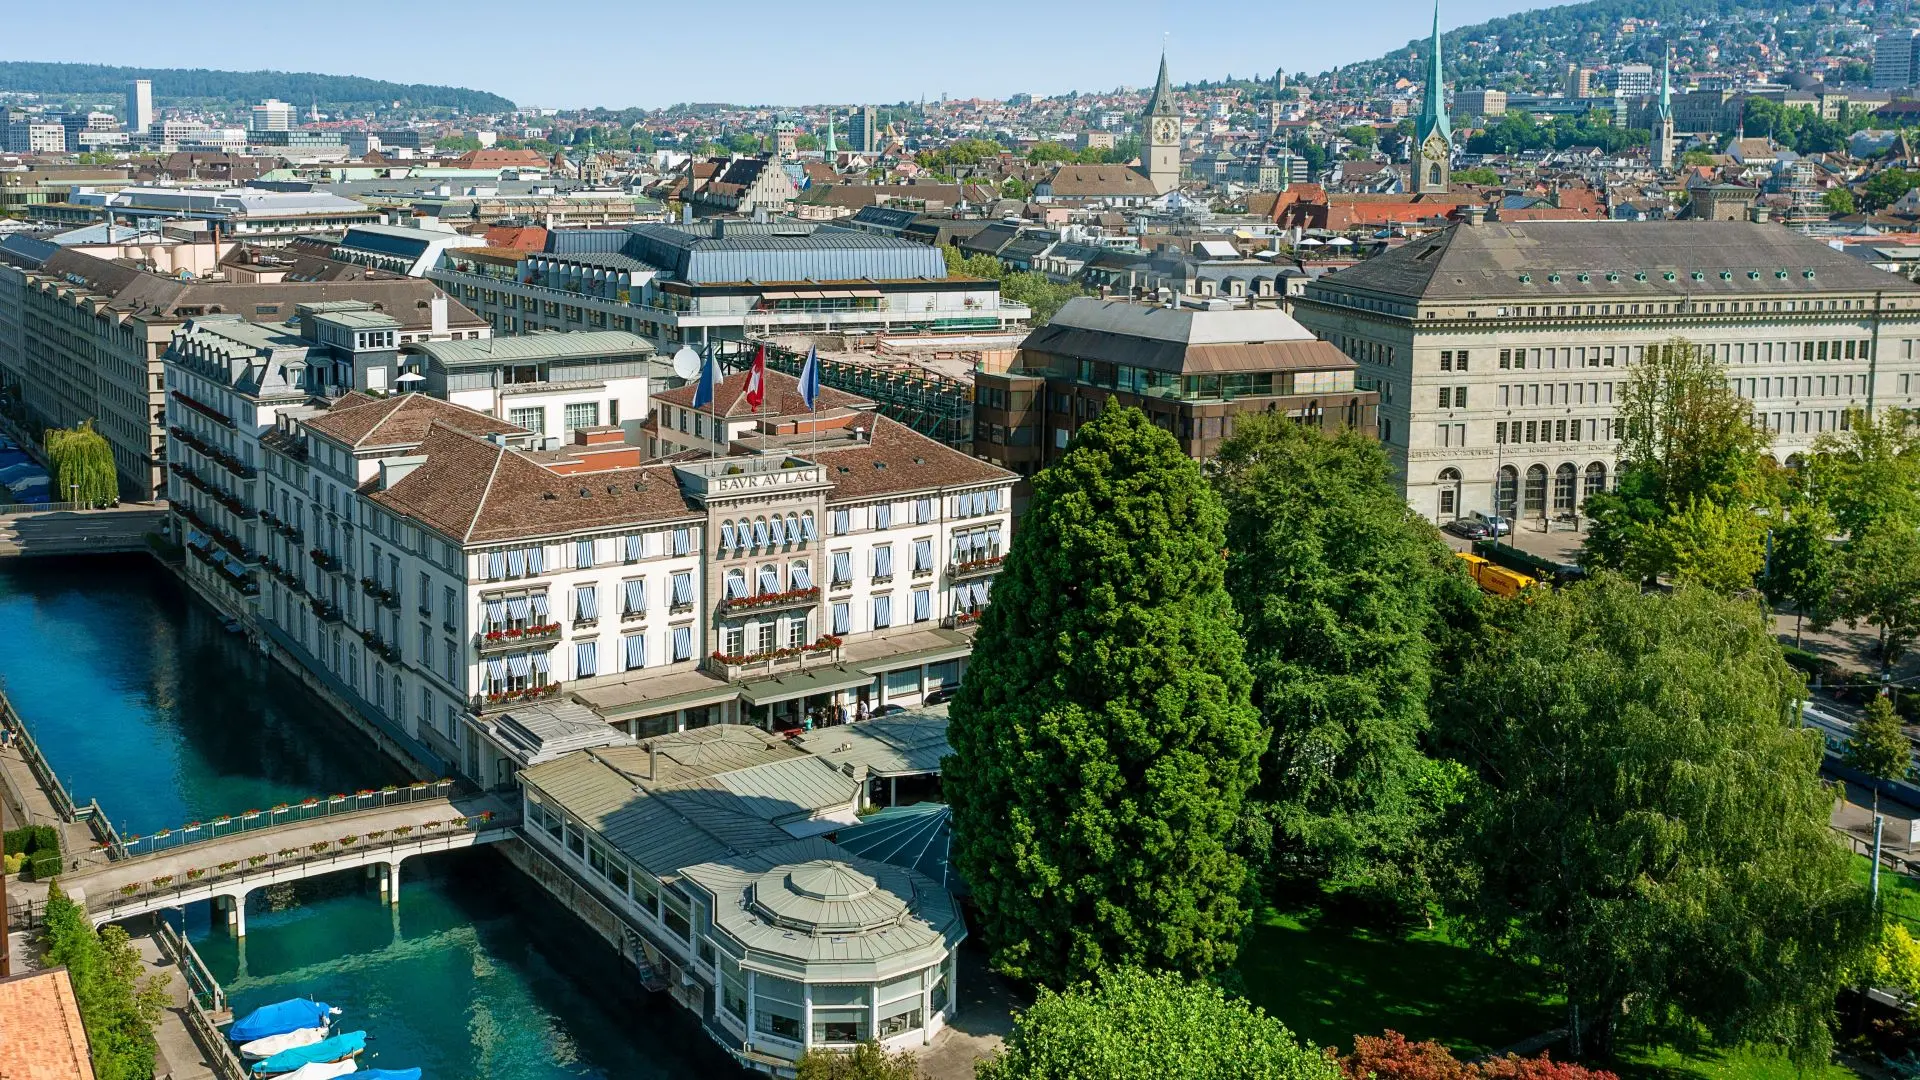 Airlines News - SWISS teams up with Zürich’s Baur au Lac for Taste of Switzerland 